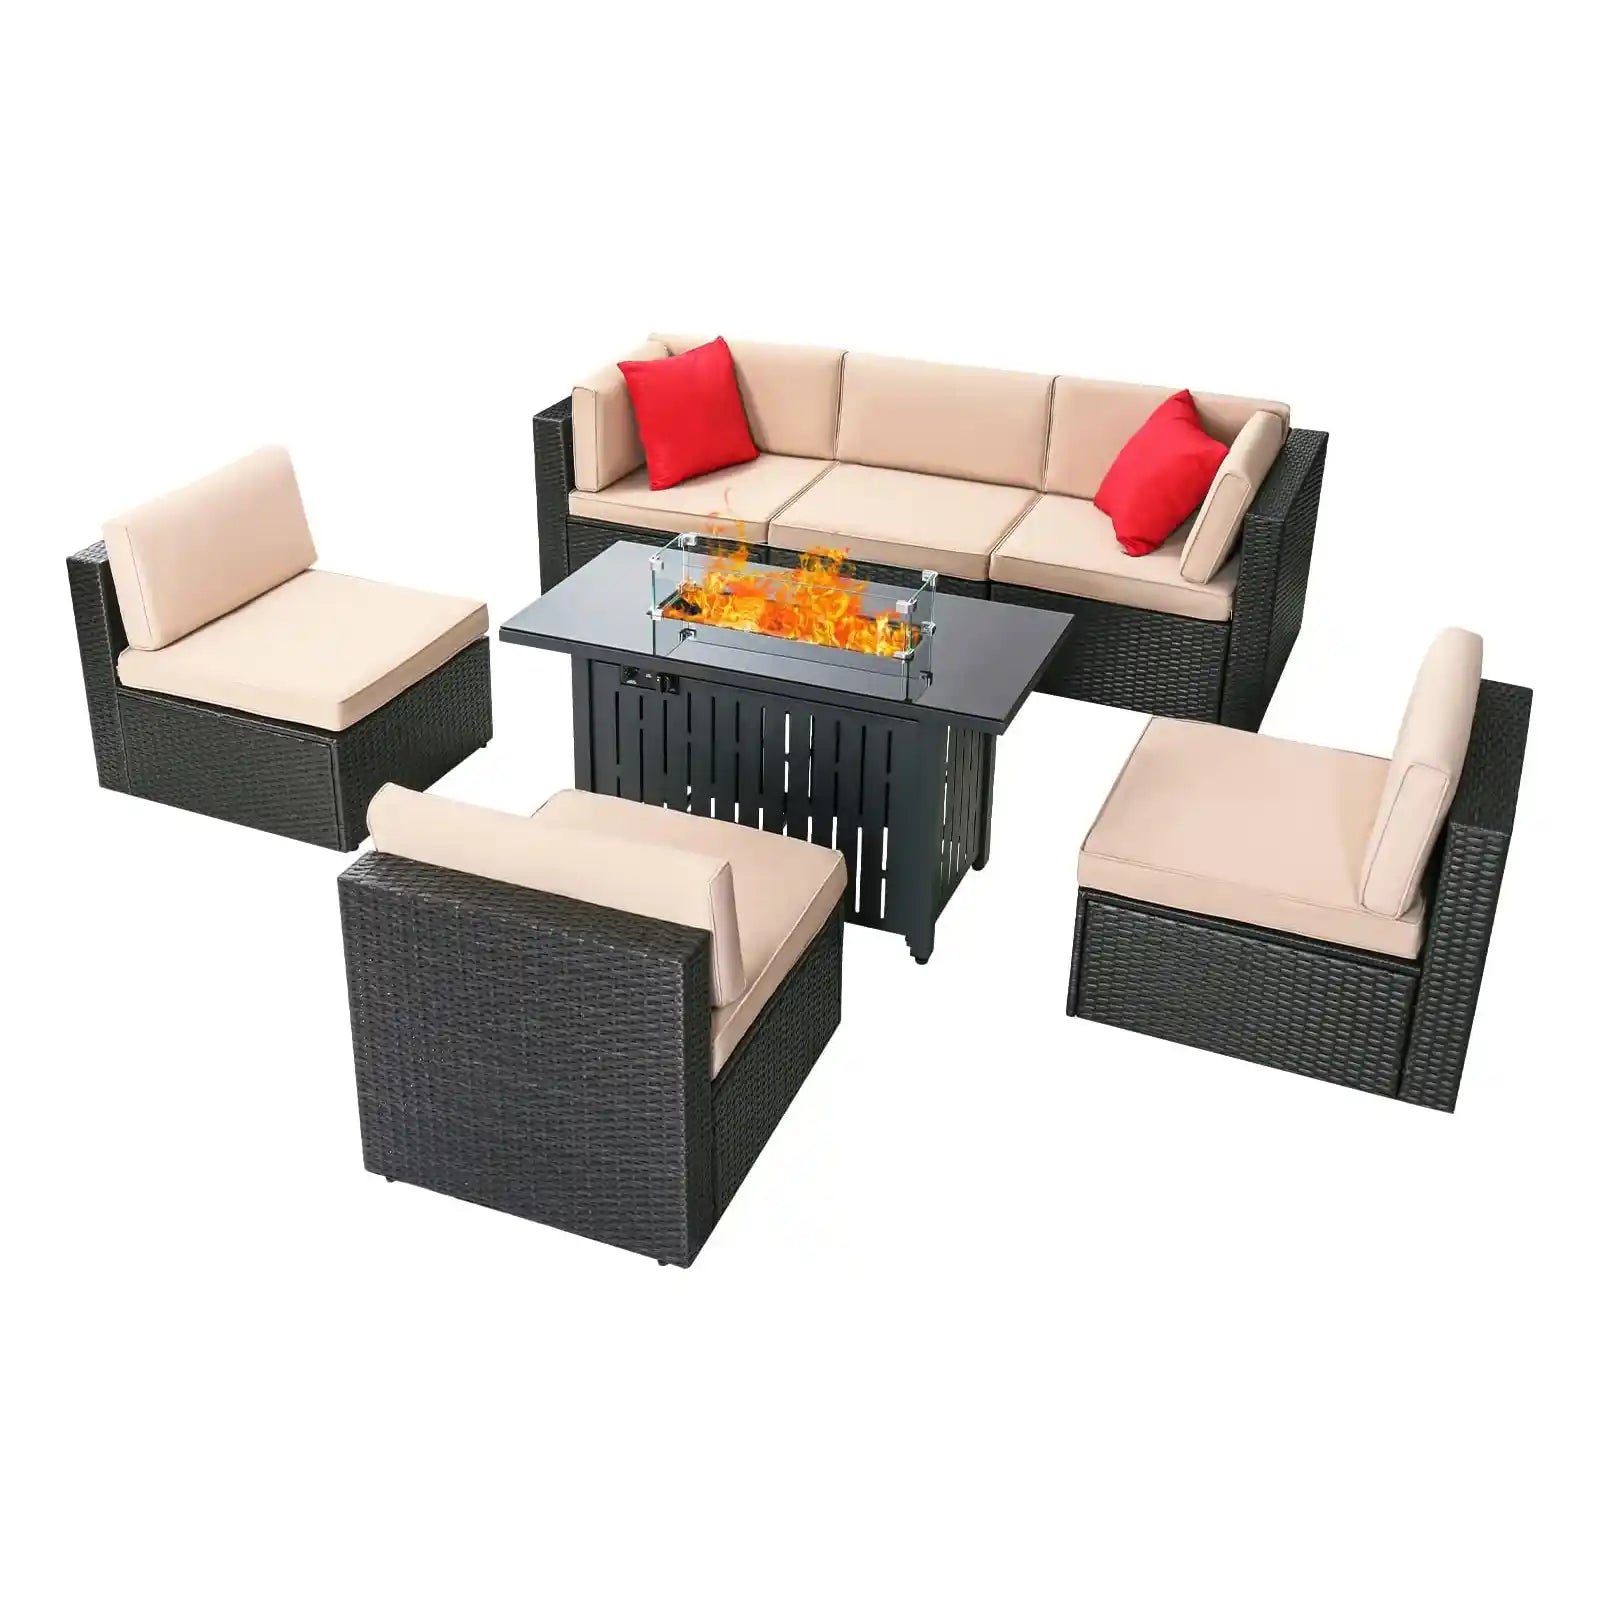 7 Pieces Outdoor Patio Furniture Set Sectional Sofa Set with Propane Fire Pit Table and Cushions for Backyard, Bistro and Poolside